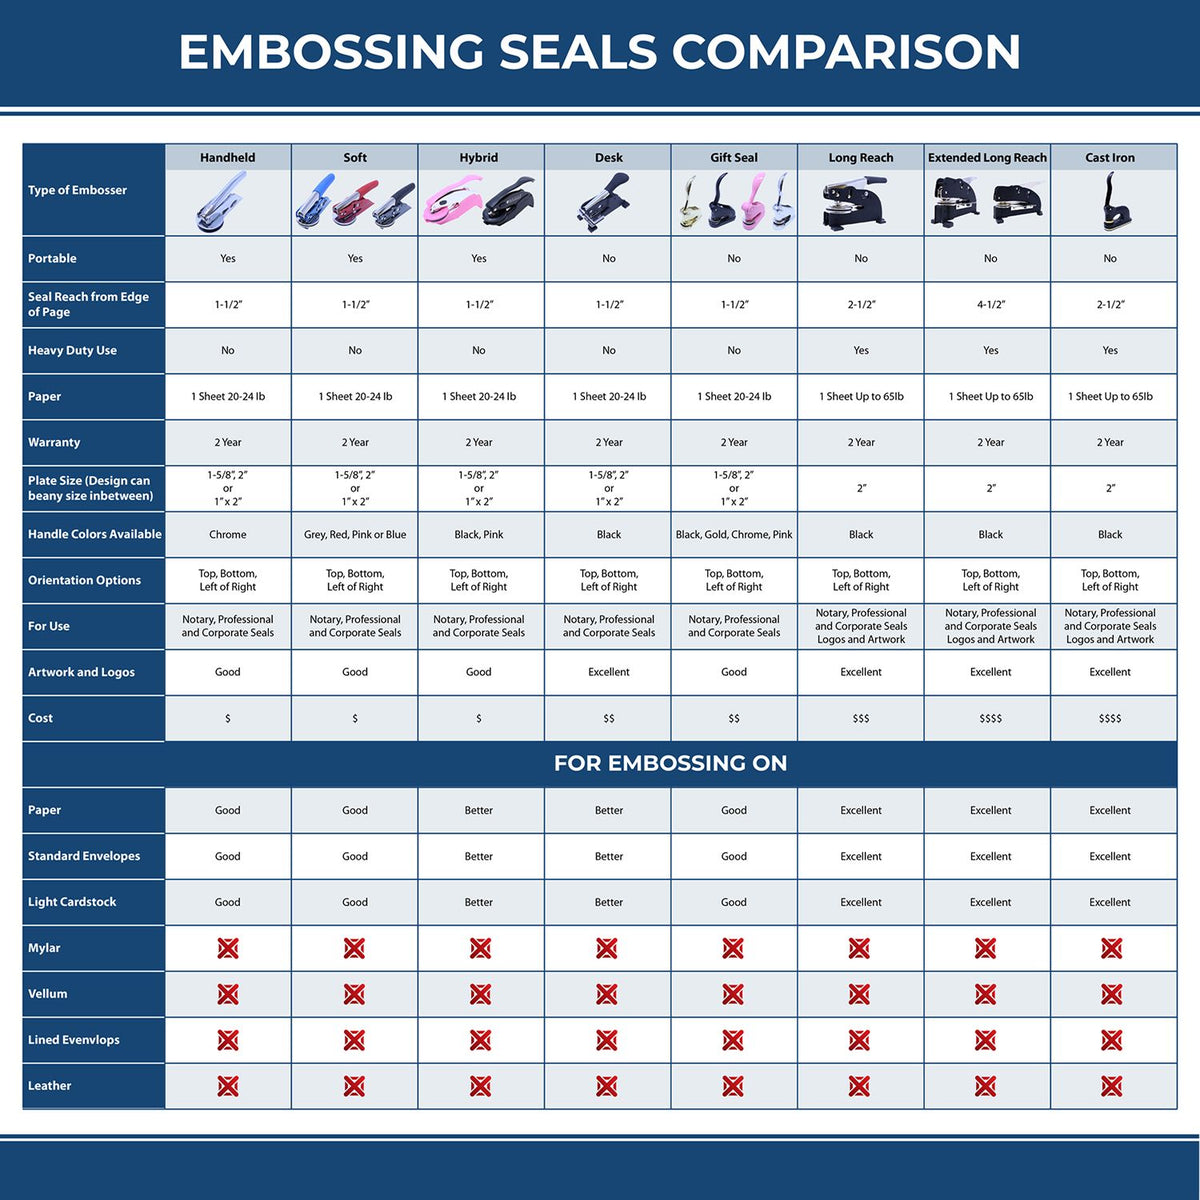 A comparison chart for the different types of mount models available for the Long Reach New Hampshire PE Seal.